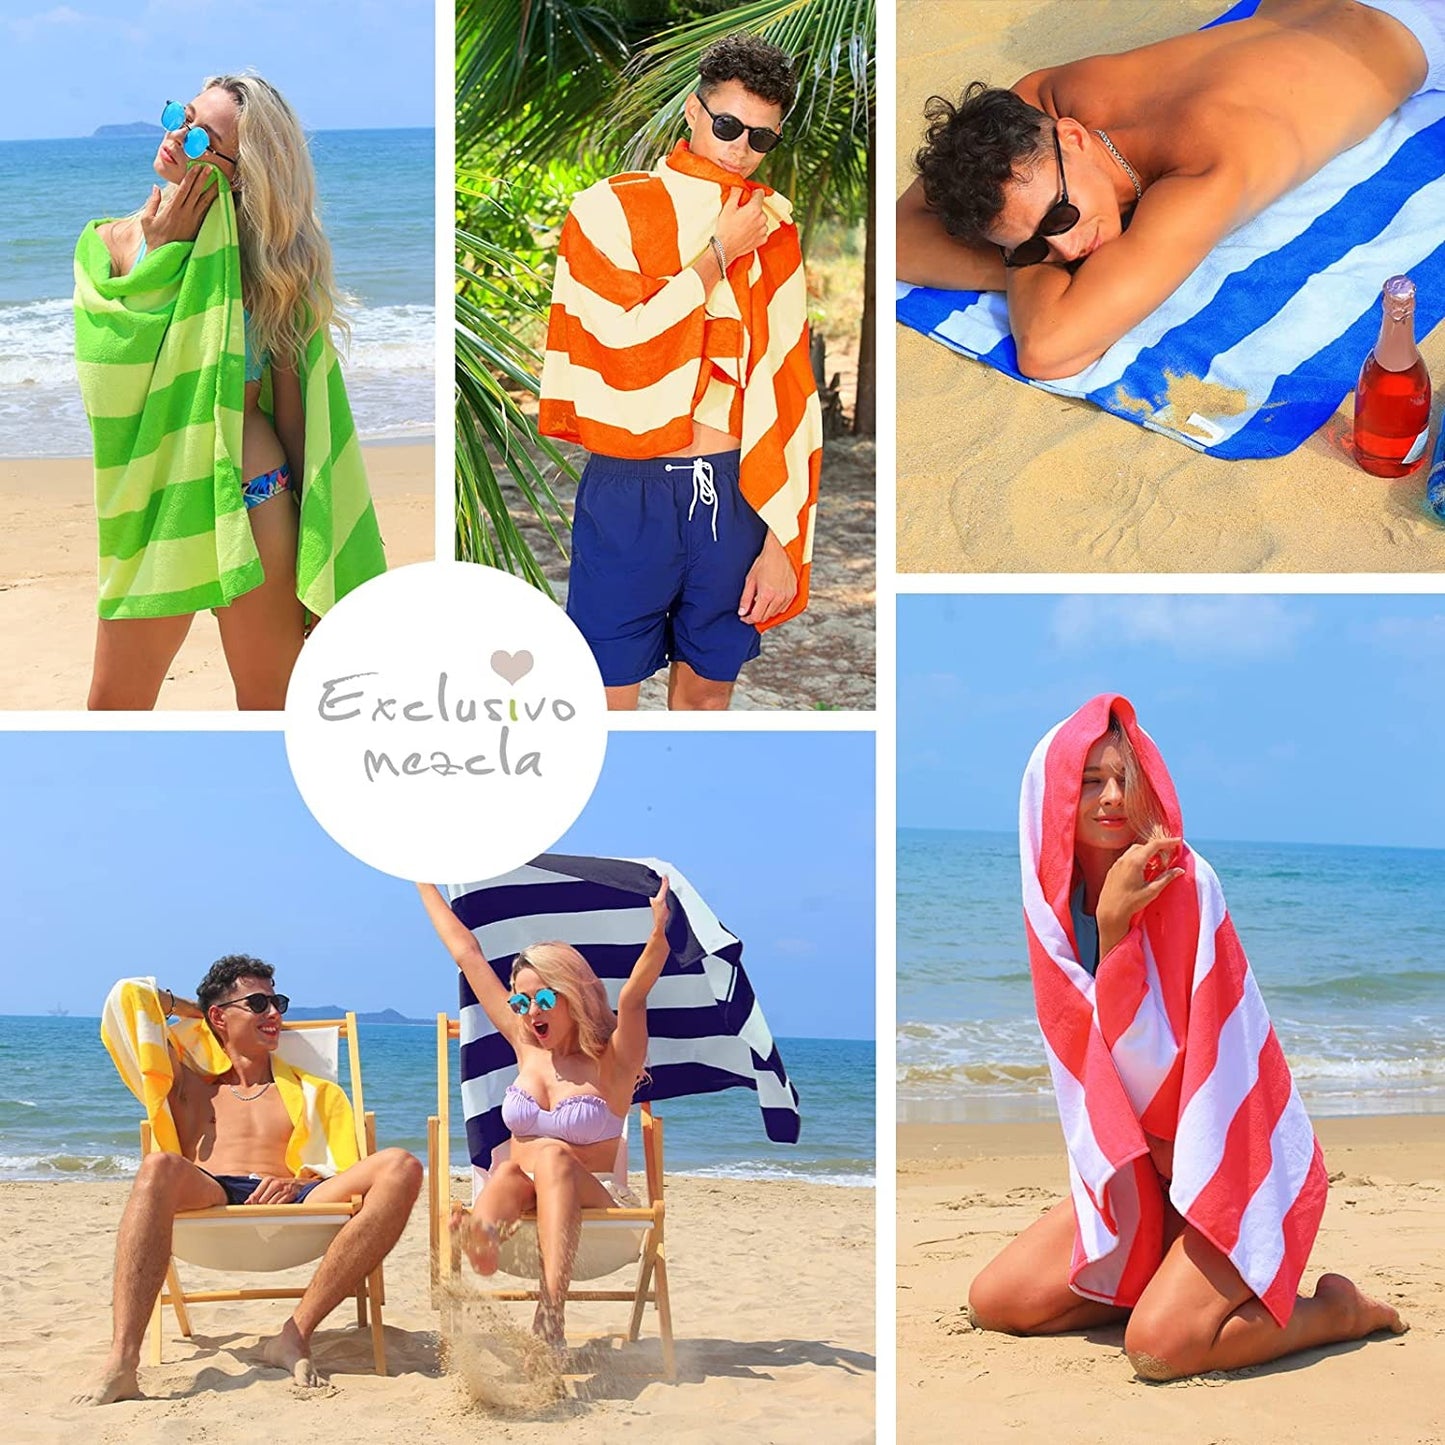 Exclusivo Mezcla 4-Pack Microfiber Cabana Striped Large Beach/Pool/Bath Towel for Adults (Blue, 30" x 60") - Soft, Quick Dry, Lightweight and Absorbent